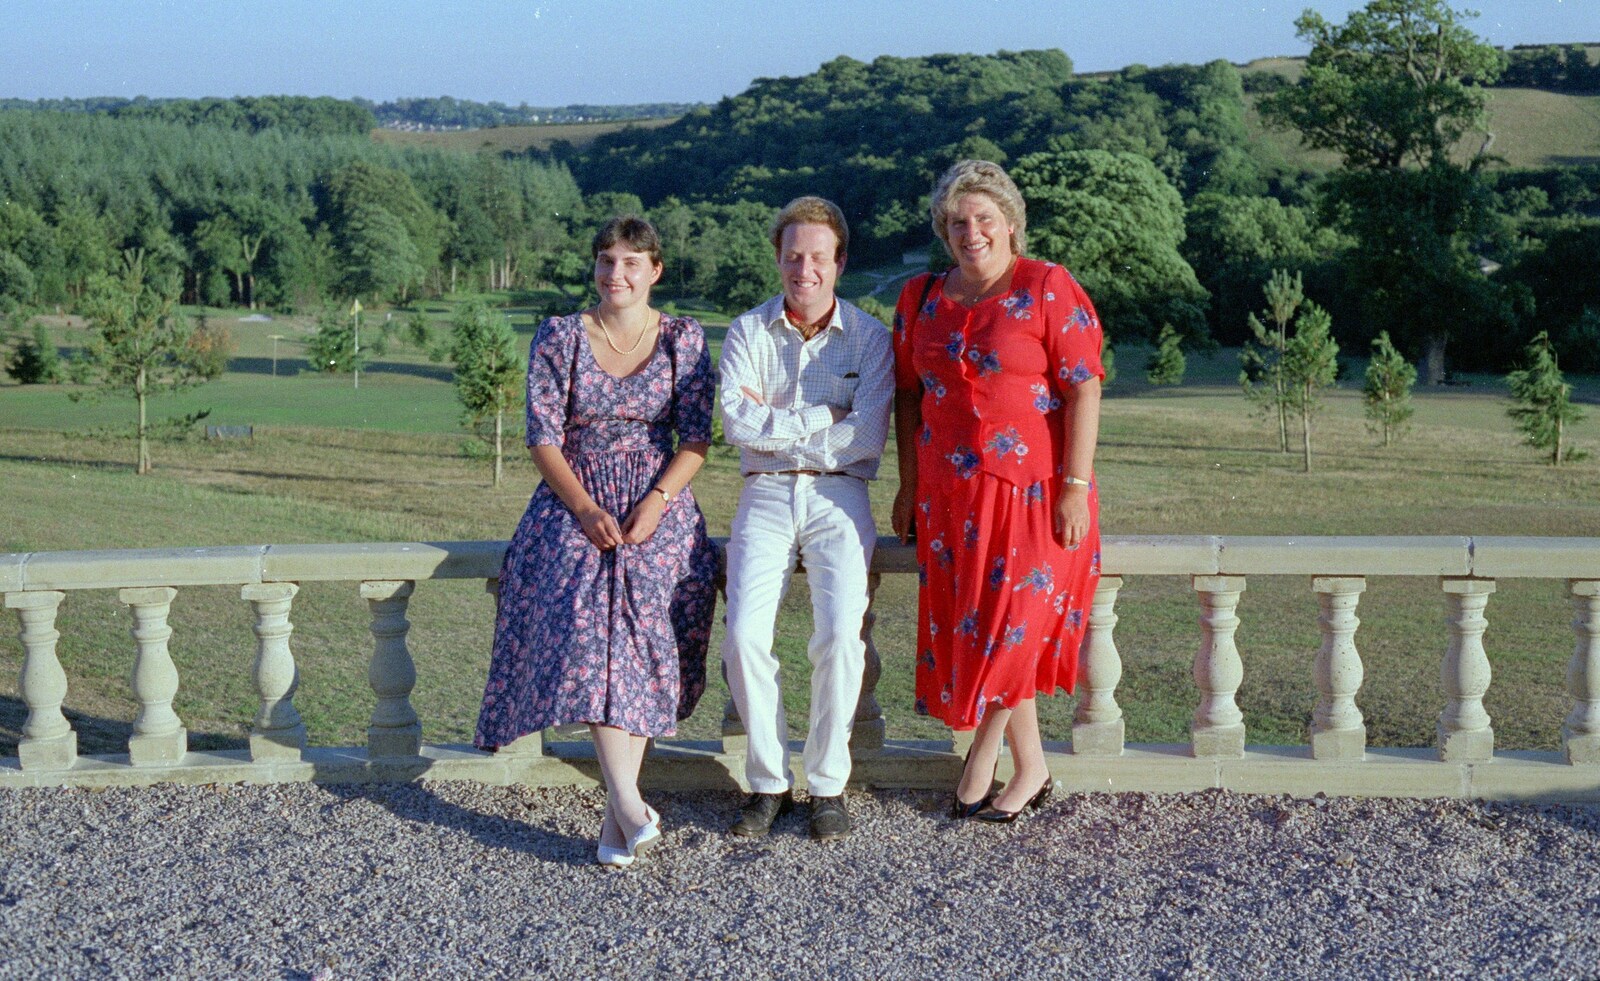 Uni: Country Clubs, On The Beach and Organs, Plymouth - 28th May 1989: Rebecca, Andrew and Beccy's mum at a country club